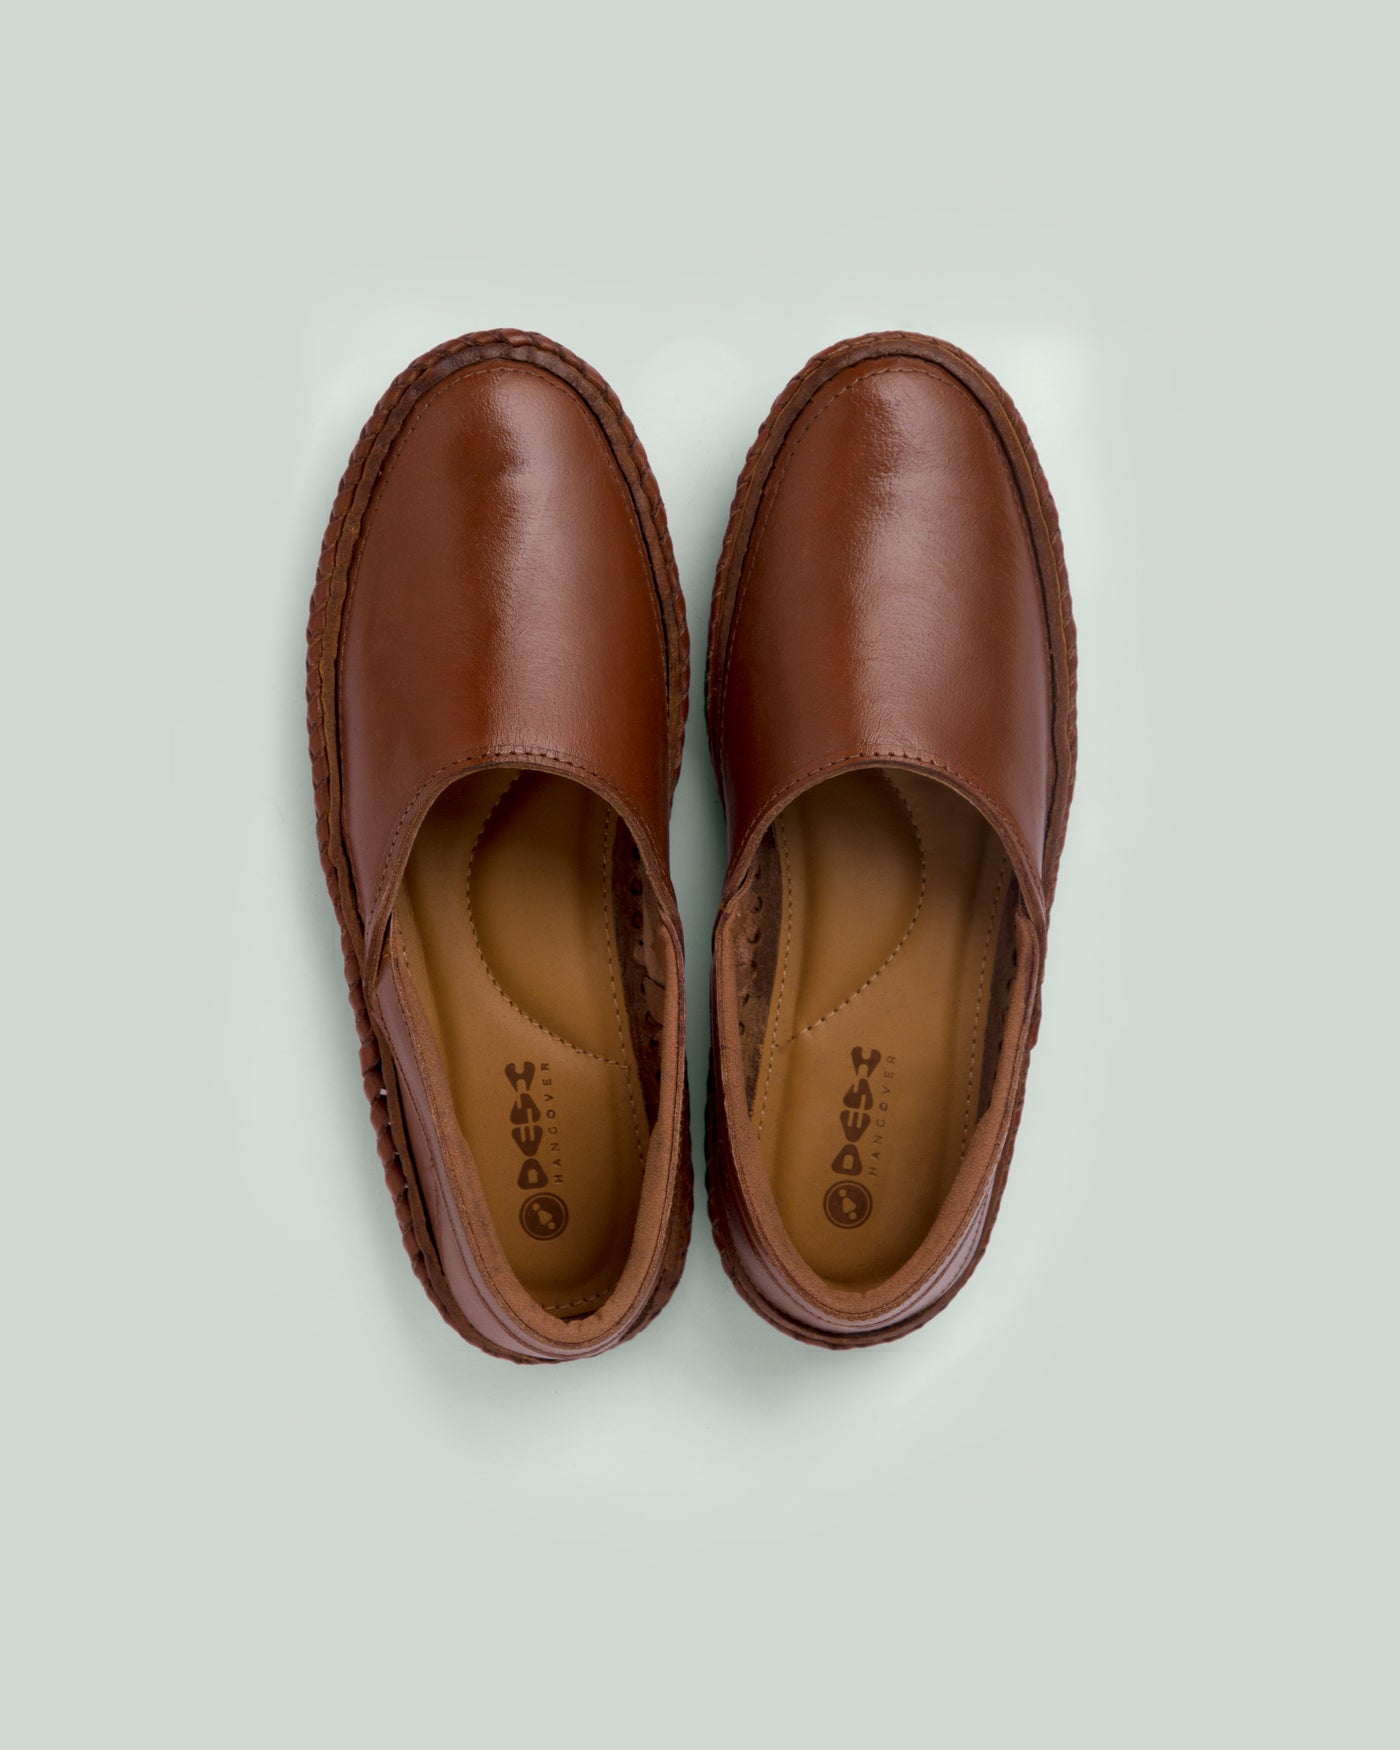 Fireworkshouse-handmade-leather-shoes-TYCOON TAN